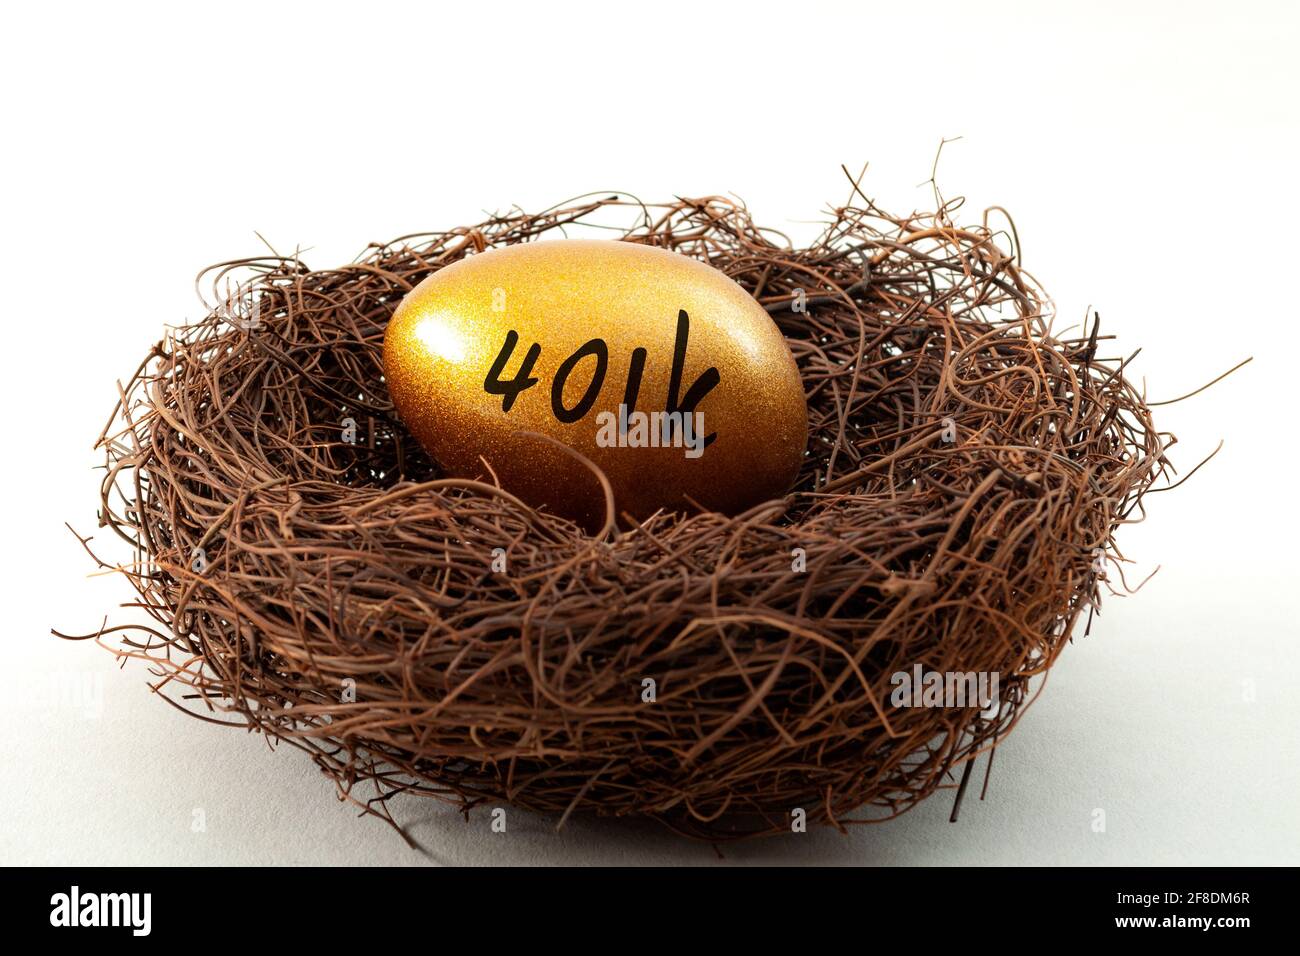 Individual retirement account, personal savings and pension fund concept with close up on a golden egg in a nest symbolizing the accumulated wealth wi Stock Photo